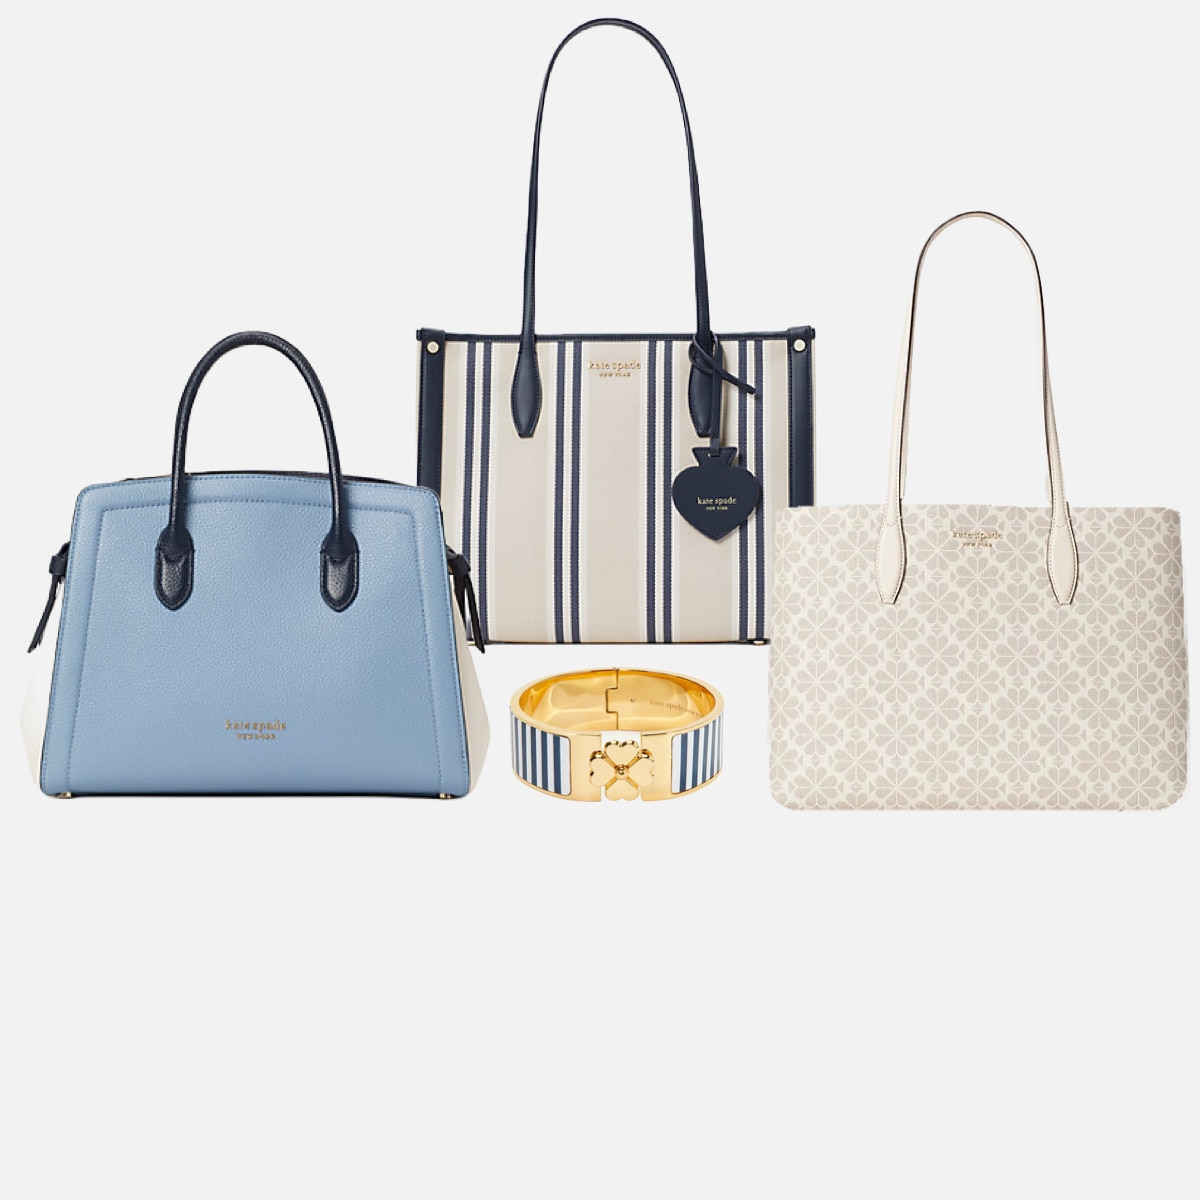 Kate Spade Outlet Shop With Me | Deals Up to 80% OFF - YouTube